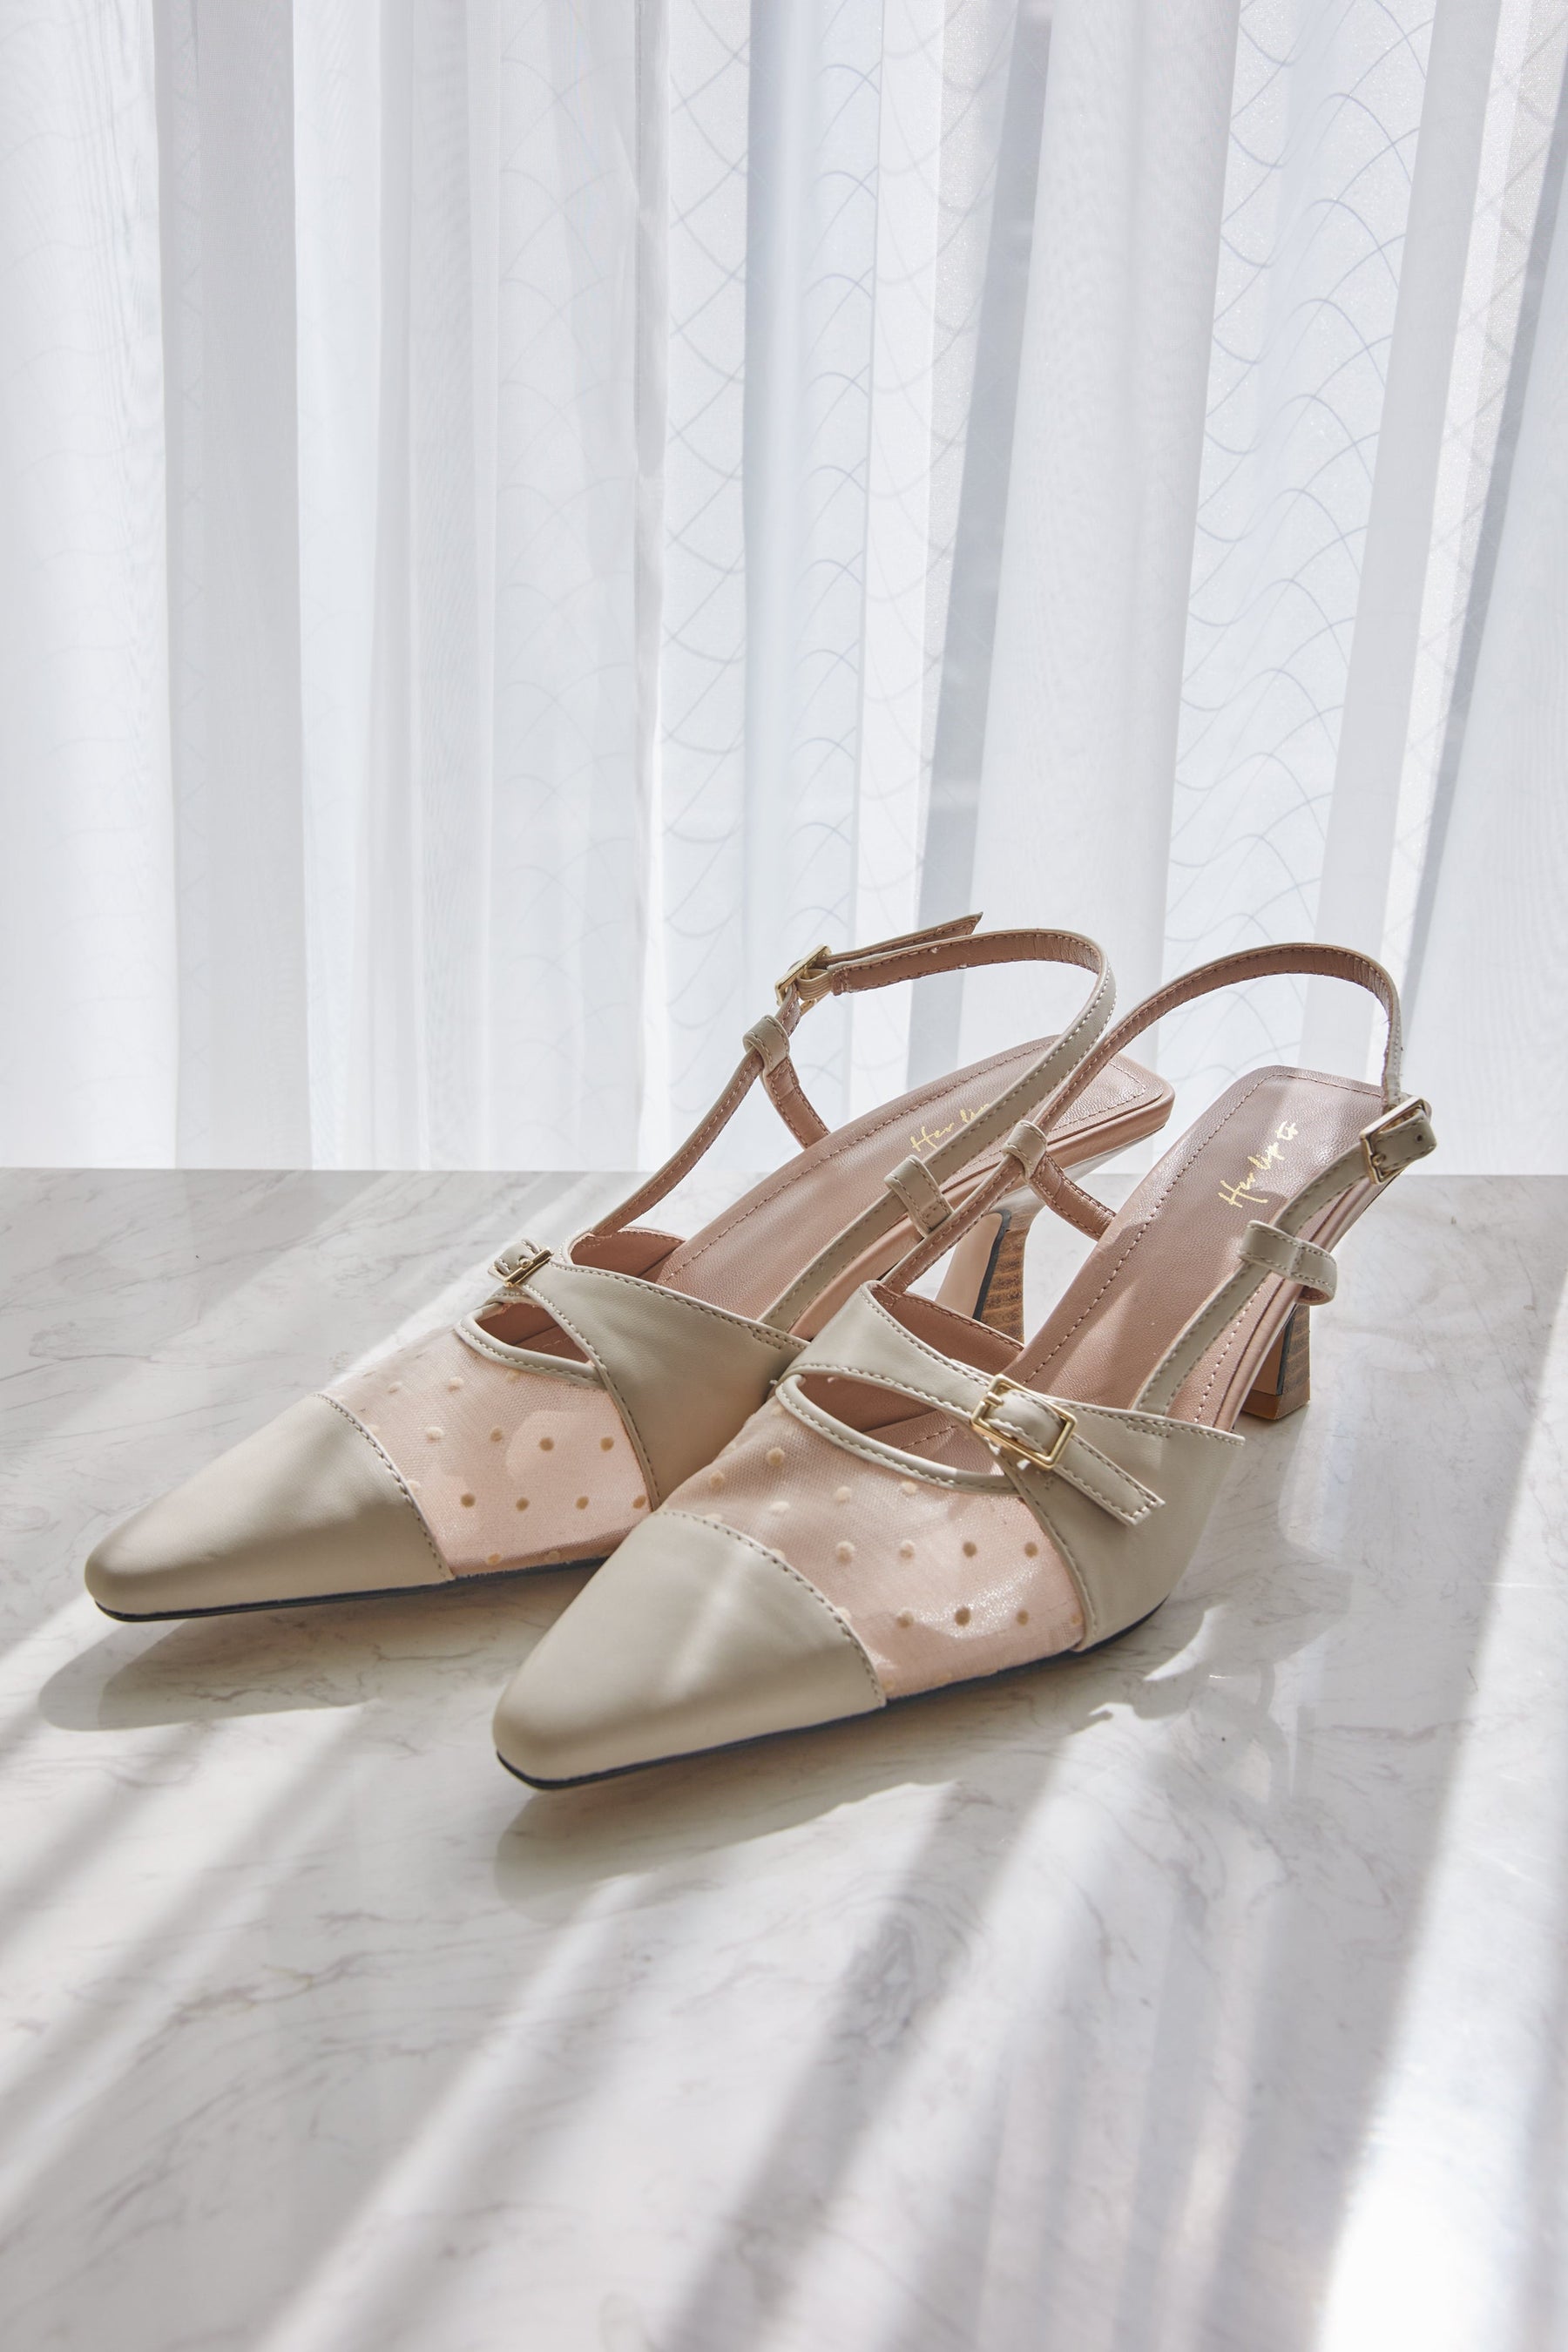 Her lip to Dot Tule Sandals - ミュール